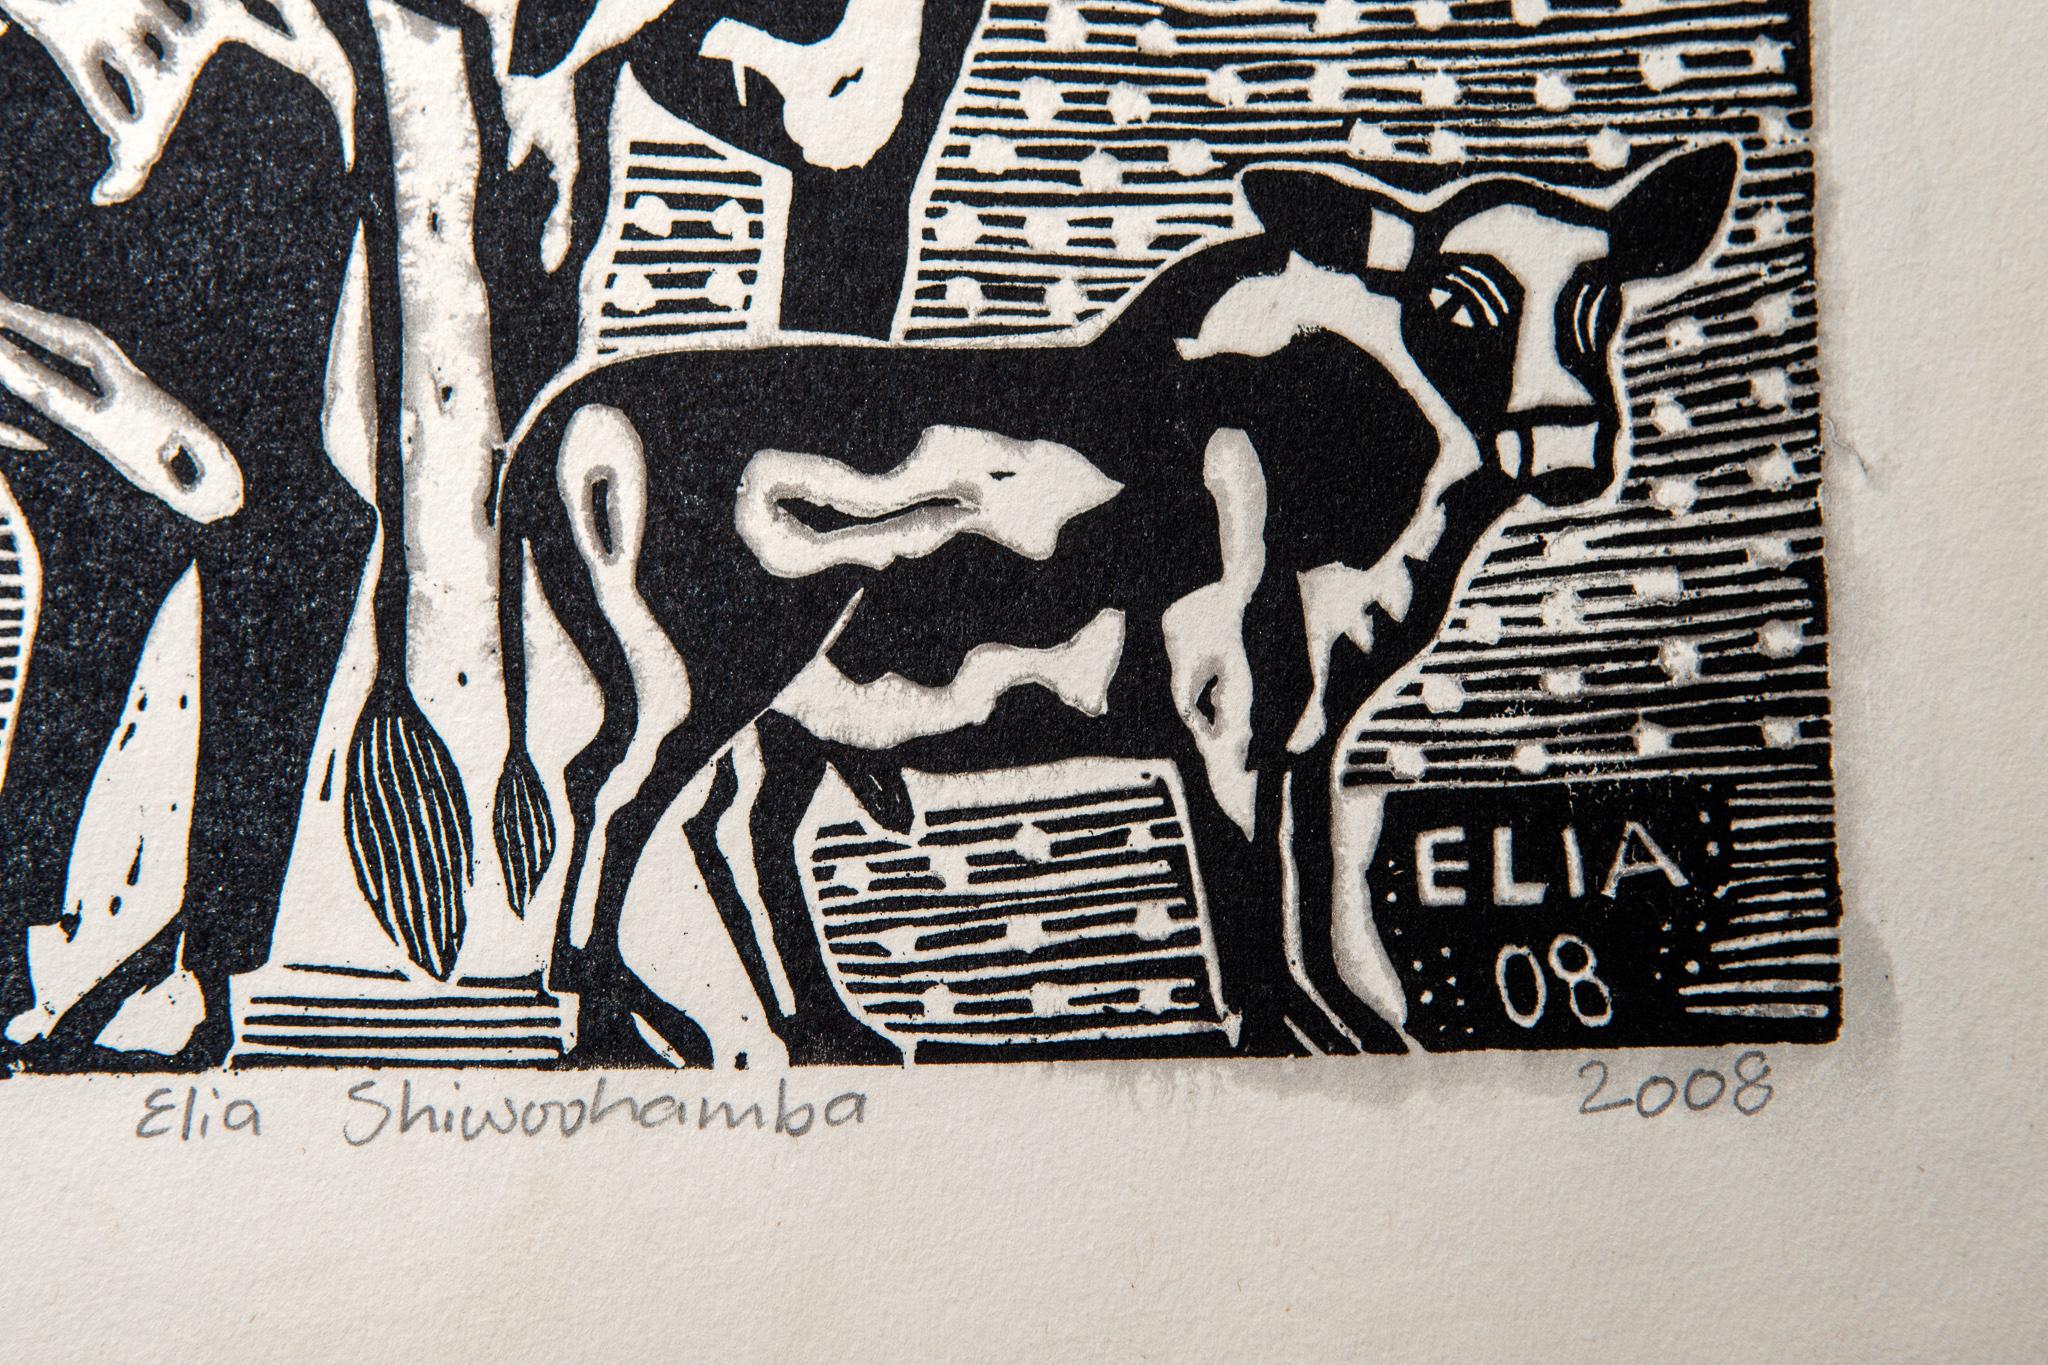 Shiwoohamba's Cattle, 2008. Linoleum block print on fabriano paper. Edition of five

Elia Shiwoohamba was born in 1981 in Windhoek, Namibia. He graduated from the John Muafangejo Art Centre in Windhoek in 2006. Specialising in printmaking and